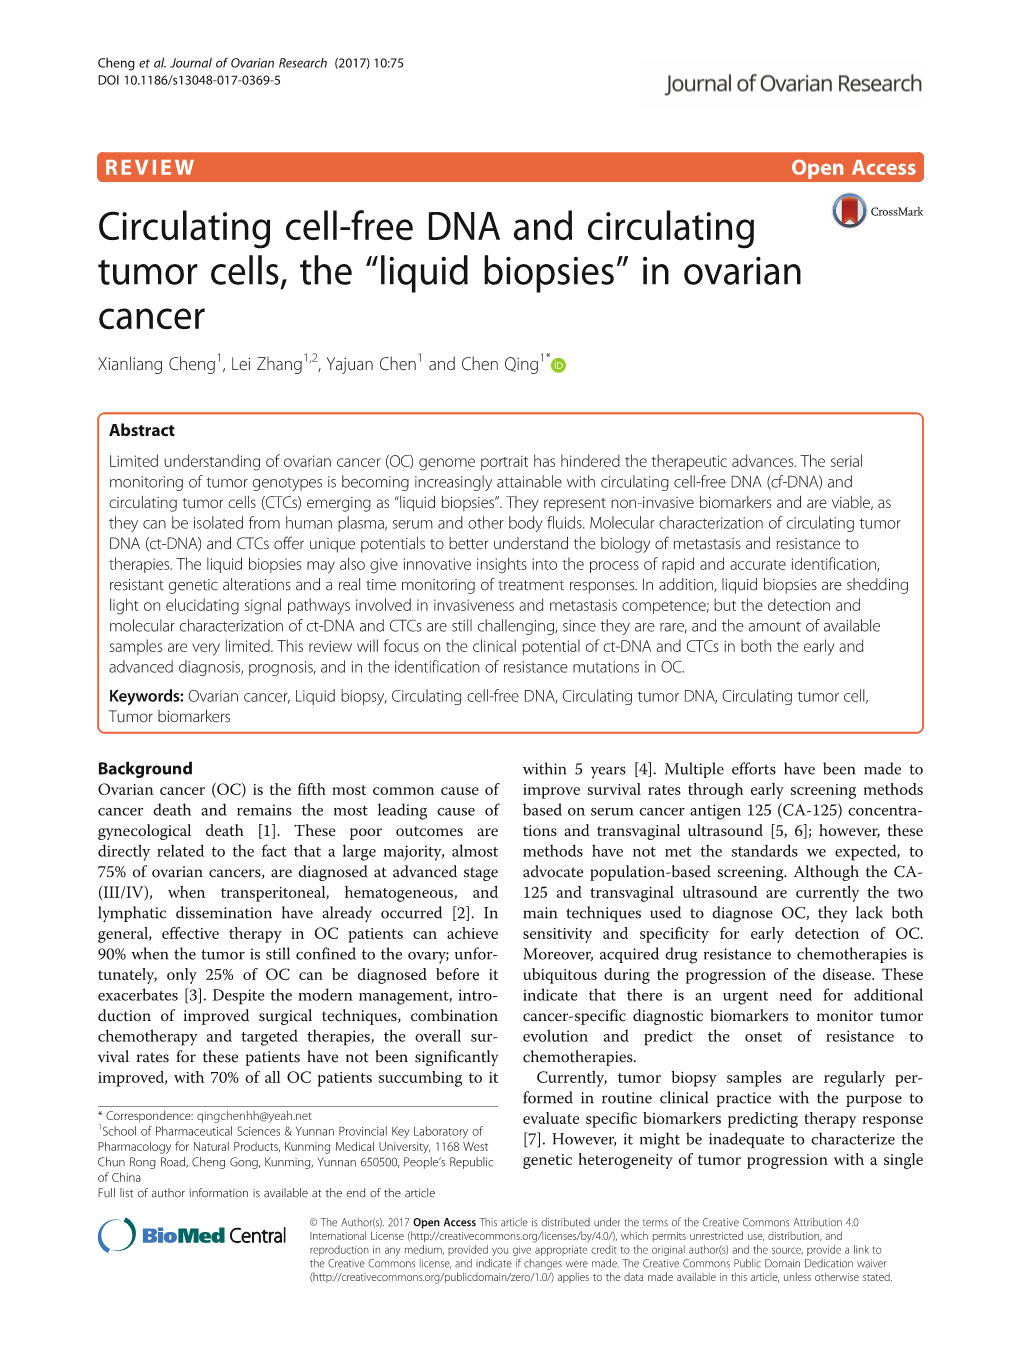 Circulating Cell-Free DNA and Circulating Tumor Cells, the “Liquid Biopsies” in Ovarian Cancer Xianliang Cheng1, Lei Zhang1,2, Yajuan Chen1 and Chen Qing1*